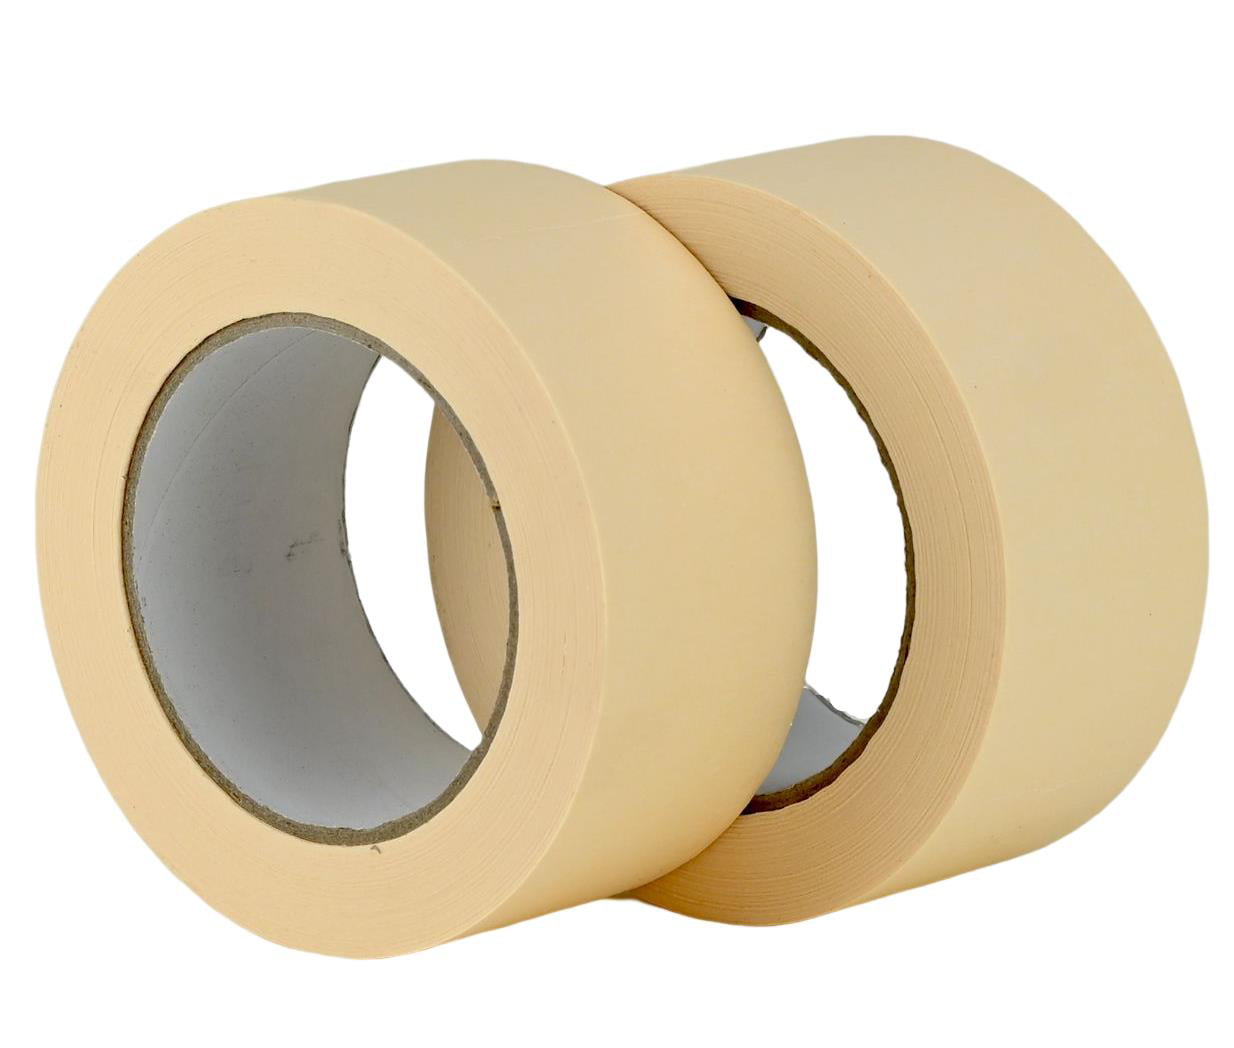 Stadea 2 inch Wide White Masking Tape General Purpose Multi Surface High Performance Roll 55 Yard Long